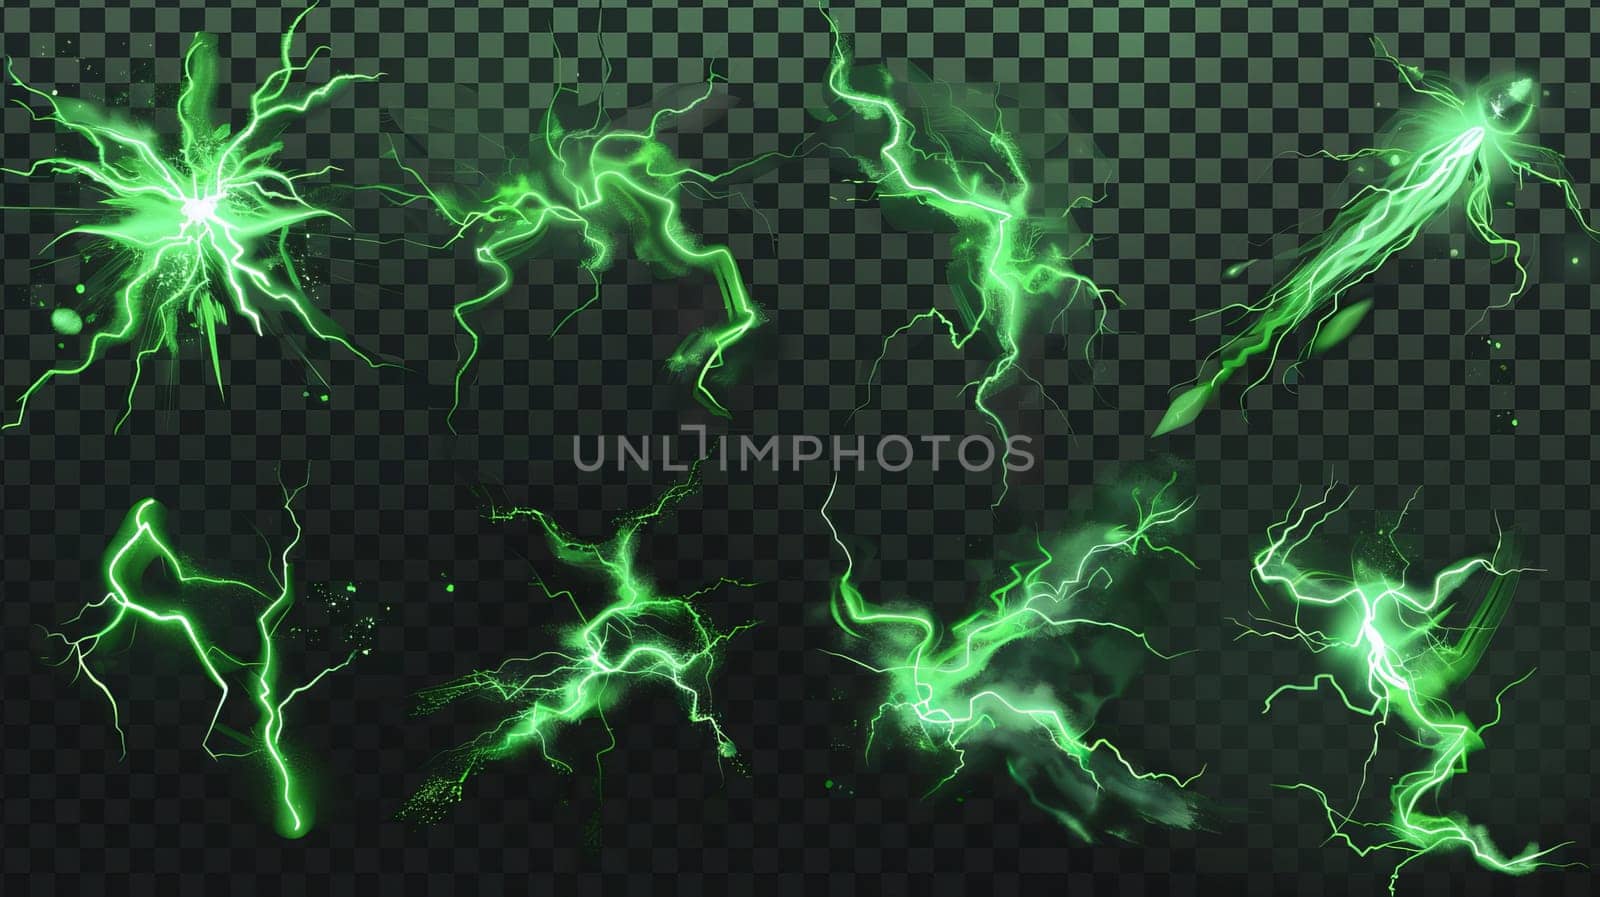 Thunderbolt discharges, lightning strikes, and electric strikes isolated on transparent background. Set of magic sparking, electric impact effects, modern realistic illustration.